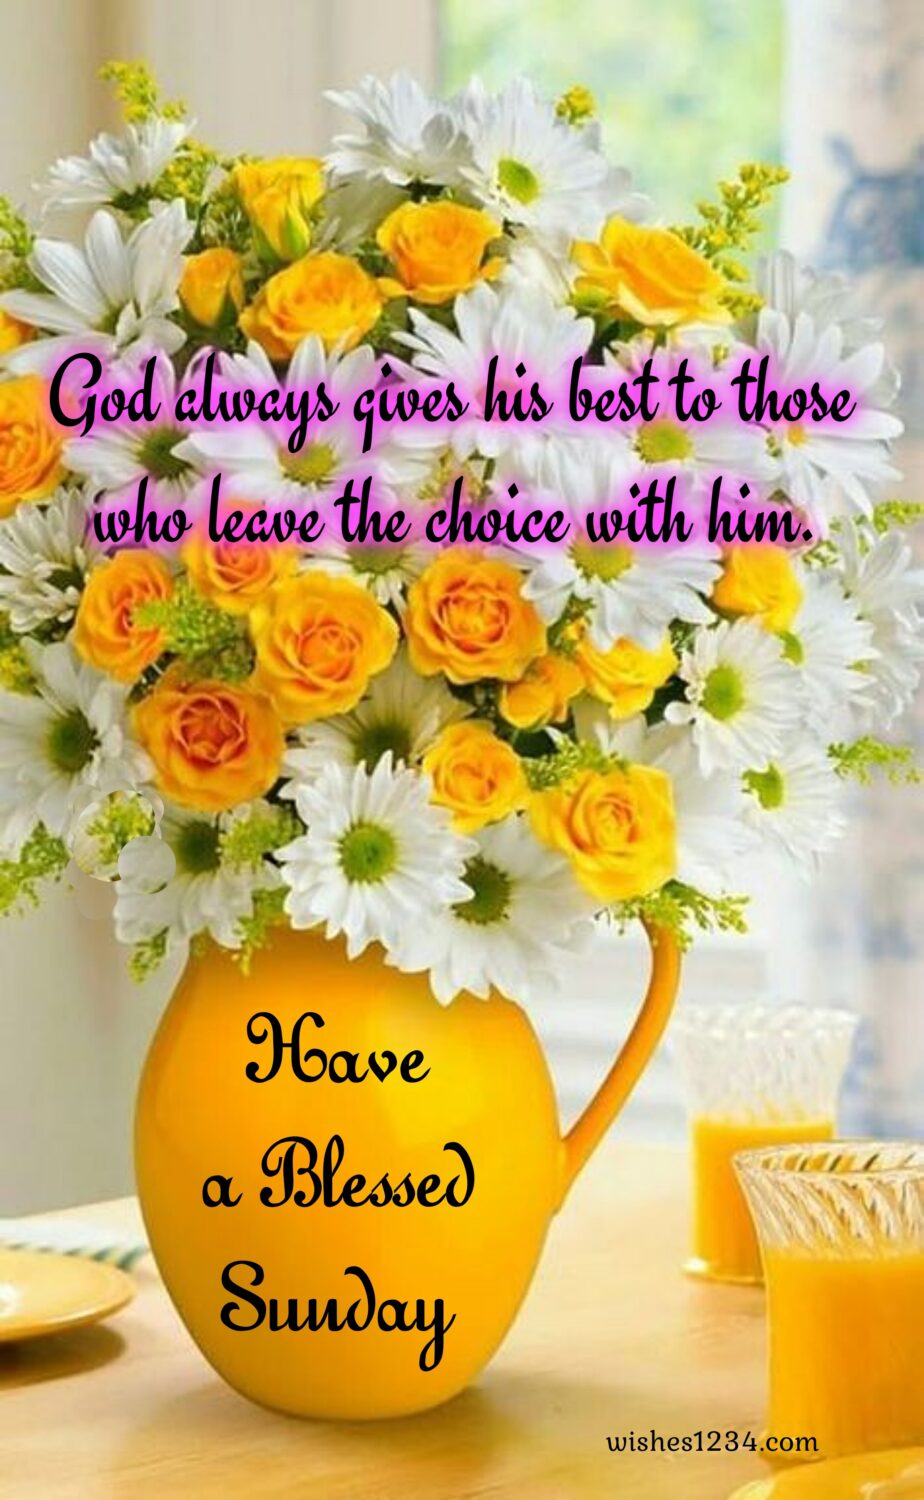 Yellow Vase with yeloow roses and white daisy, Happy Sunday Blessings Quotes Images Pictures wishes.